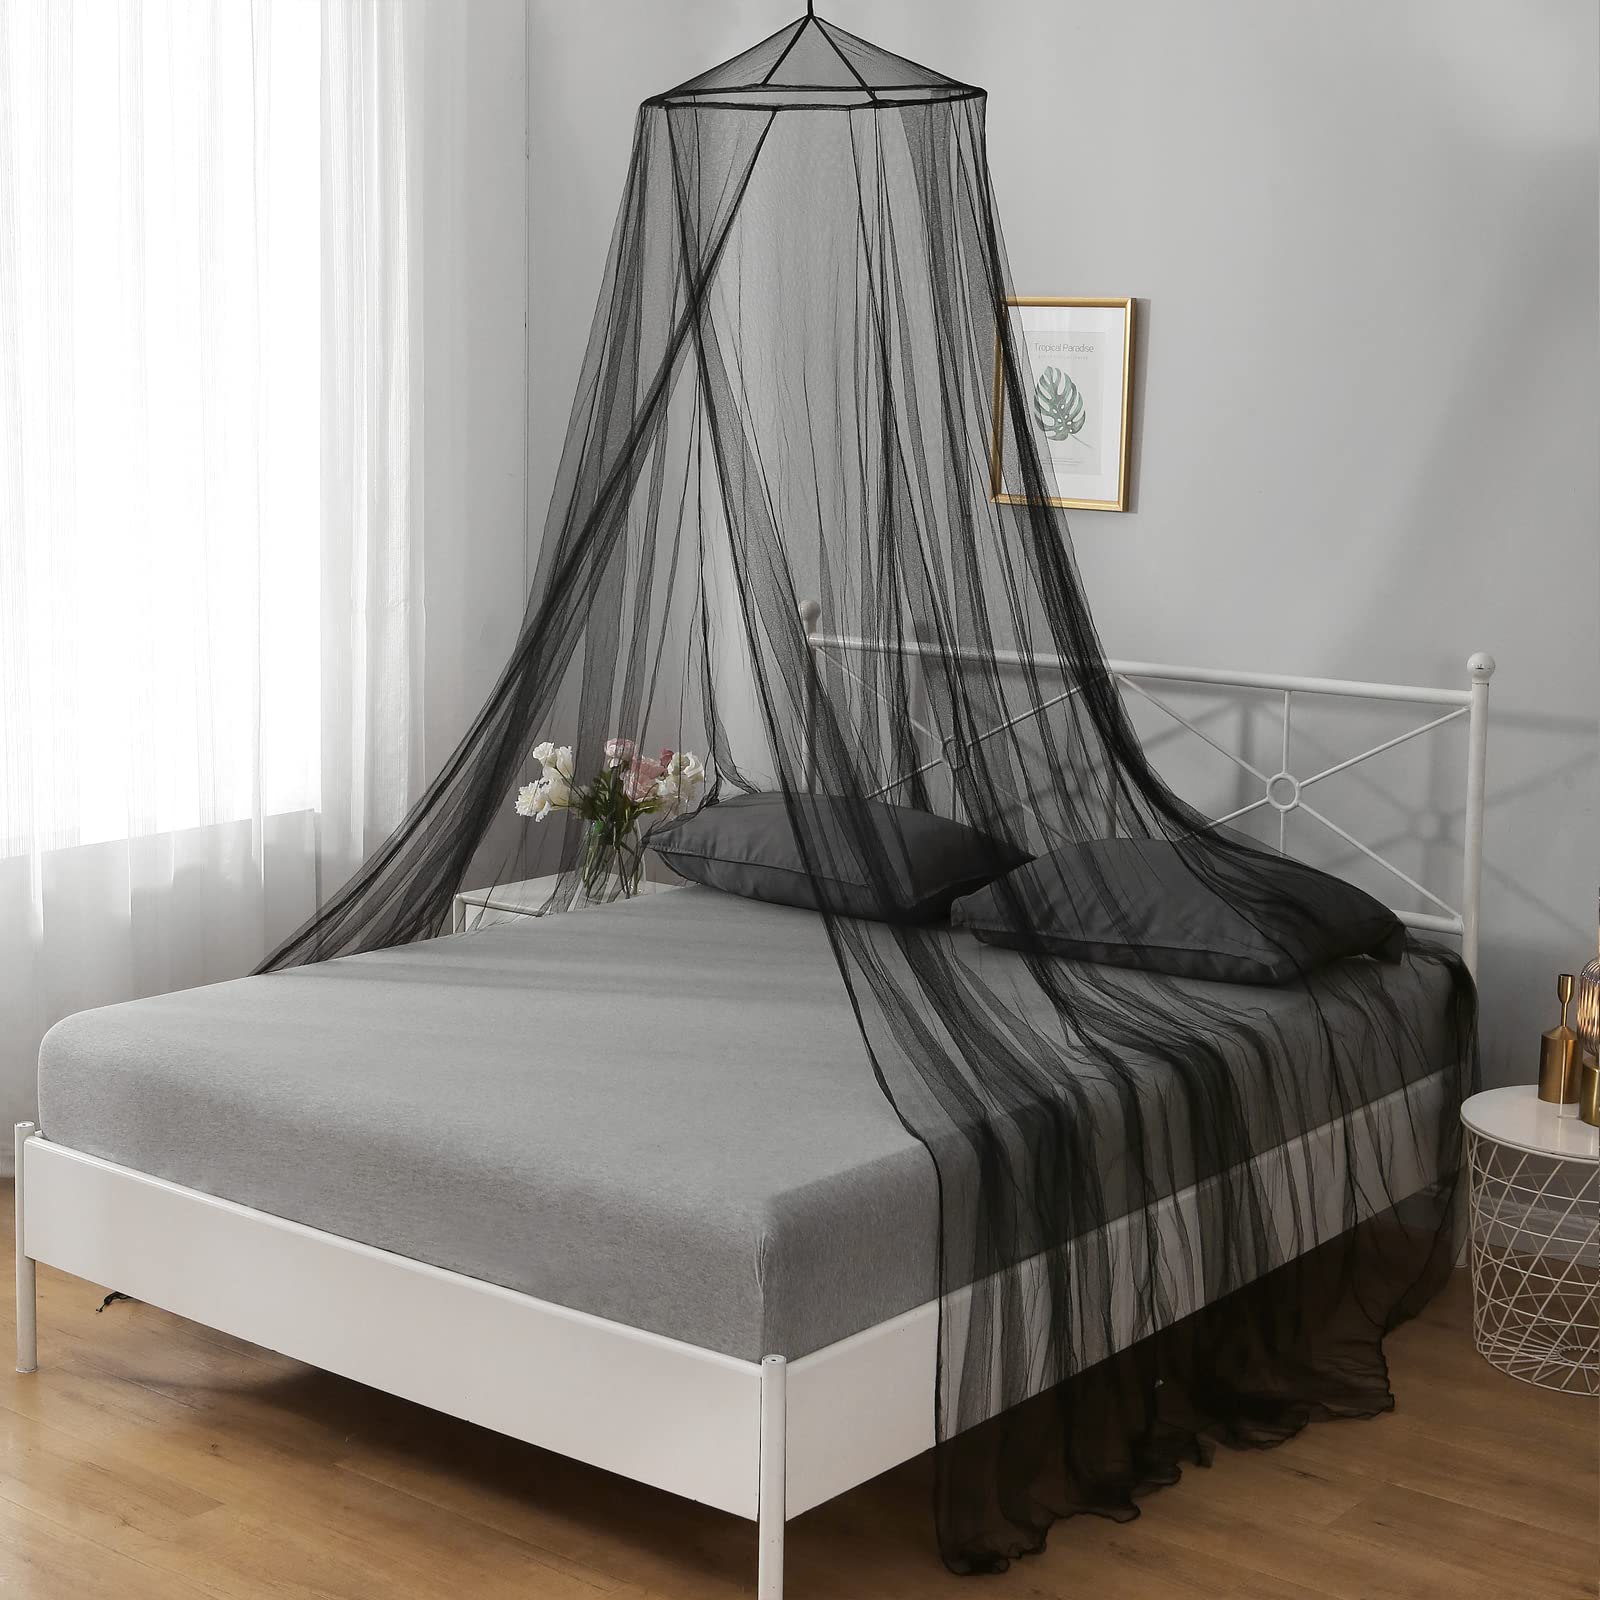 1pc Mosquito Net, Bed Canopy, Black/White Color For Garden Camping Travel  Halloween Decoration